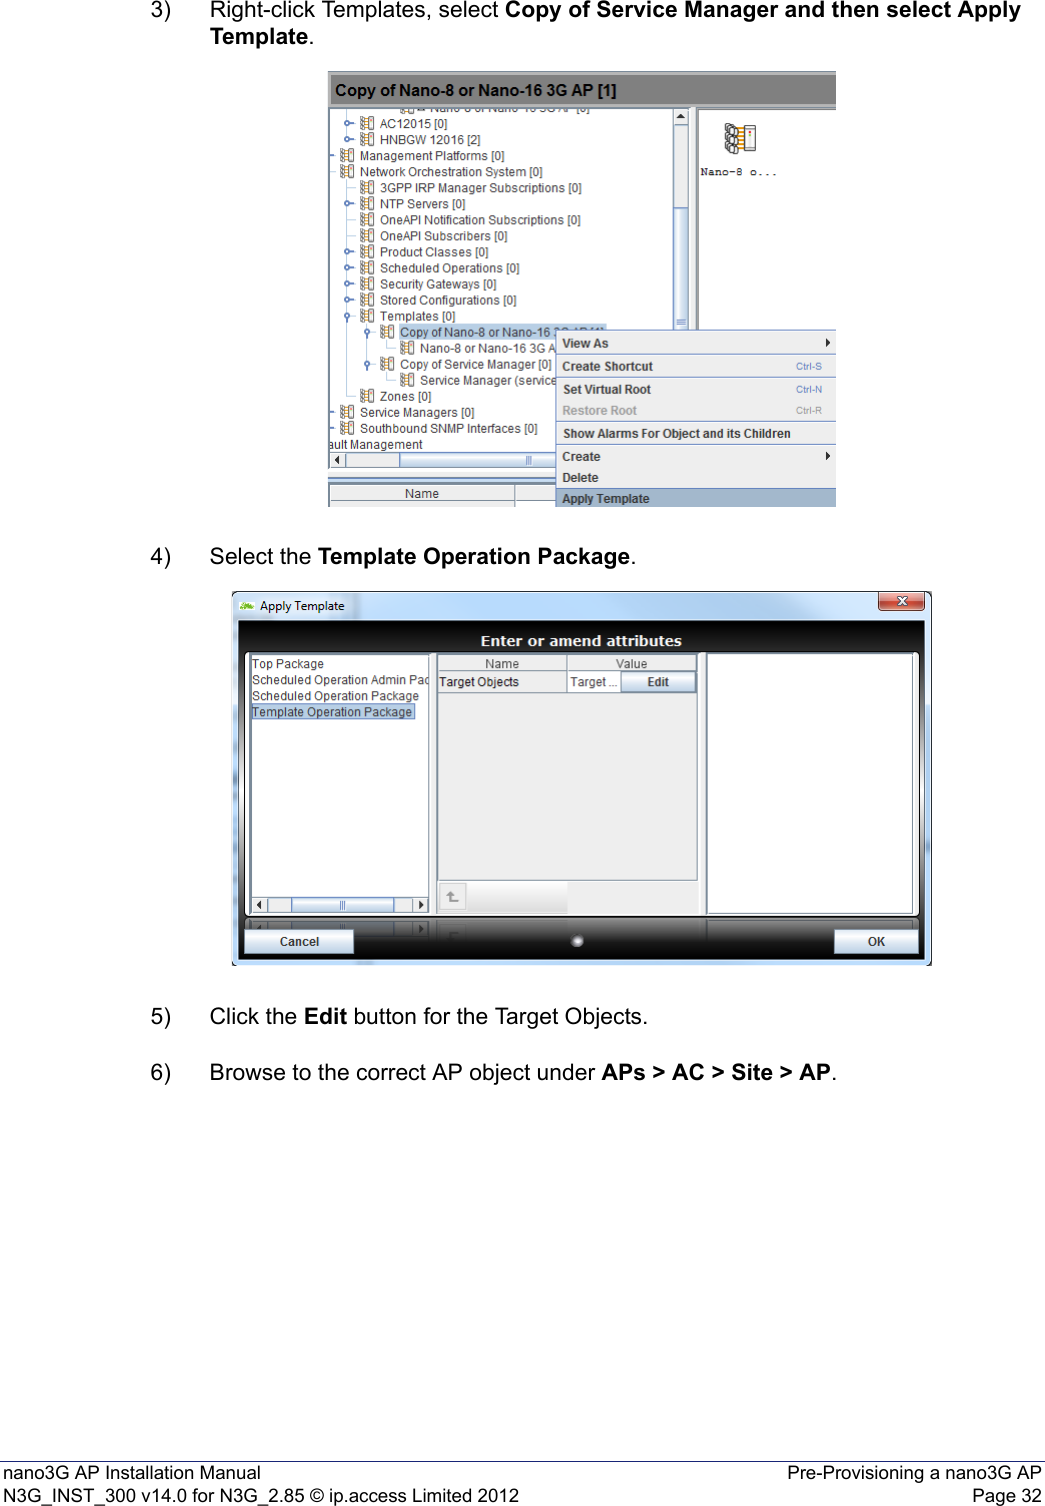 nano3G AP Installation Manual Pre-Provisioning a nano3G APN3G_INST_300 v14.0 for N3G_2.85 © ip.access Limited 2012 Page 323) Right-click Templates, select Copy of Service Manager and then select Apply Template. 4) Select the Template Operation Package.5) Click the Edit button for the Target Objects.6) Browse to the correct AP object under APs &gt; AC &gt; Site &gt; AP.